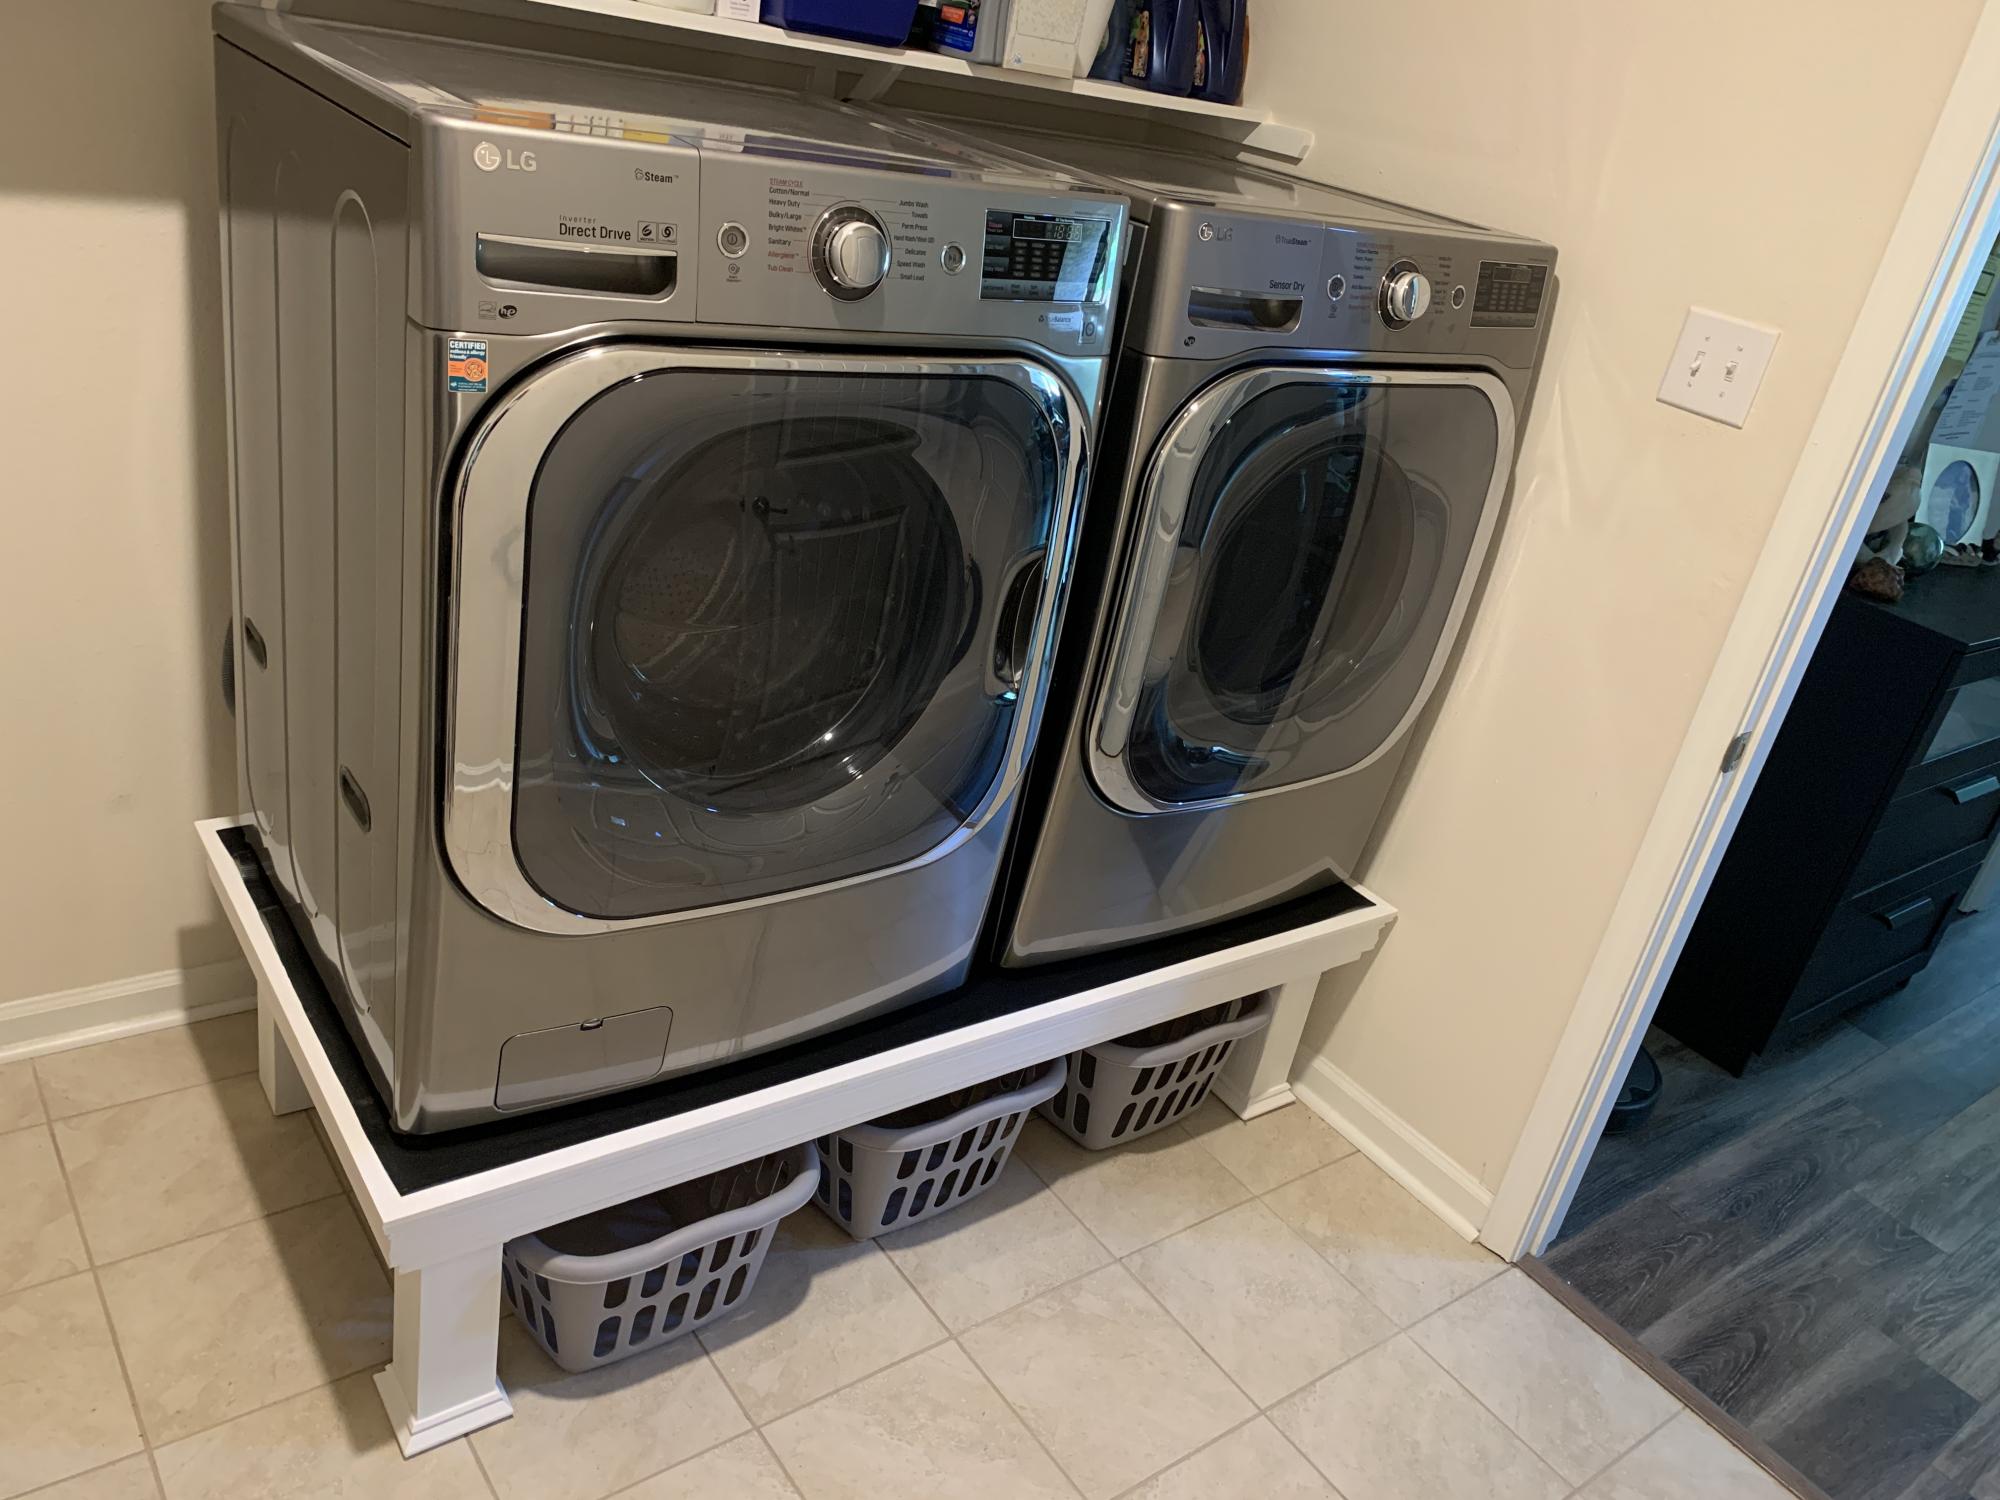 Diy Washer Dryer Stand How To Build Your Own Diy Washer And Dryer